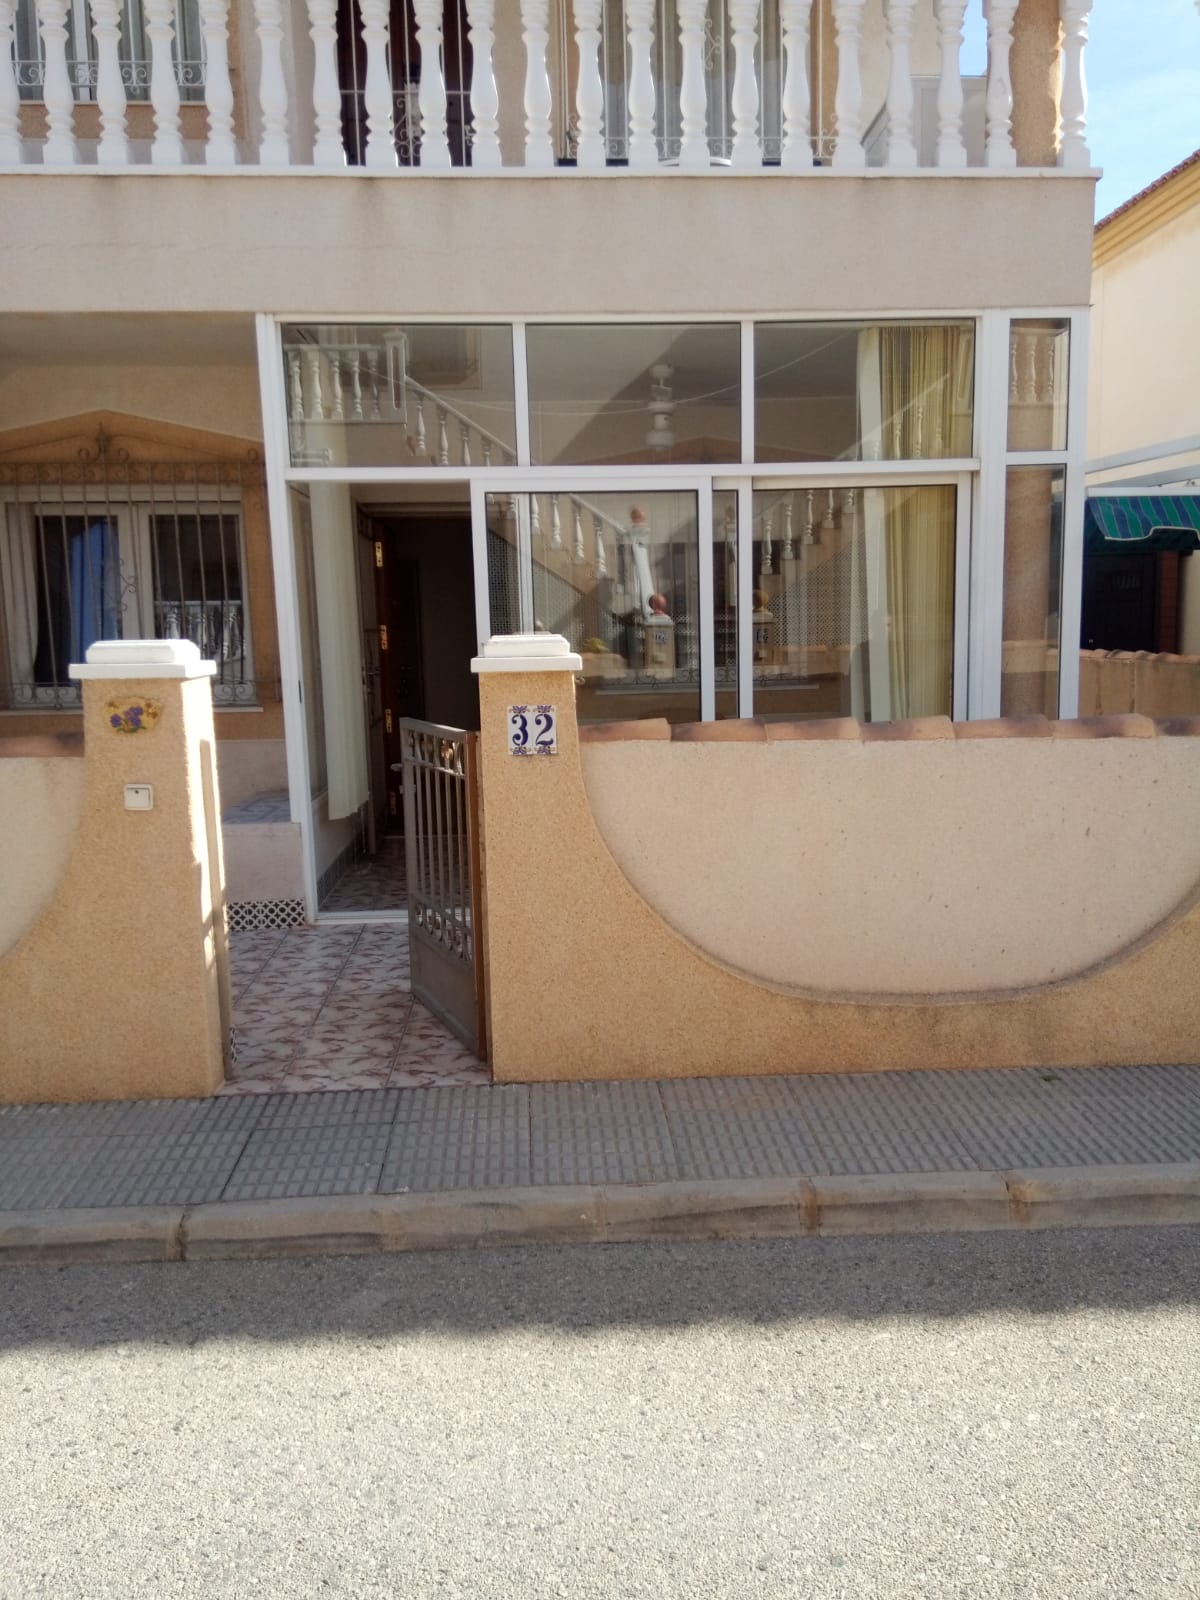 Two bedroom ground floor apartment for sale in sought-after La Zenia community